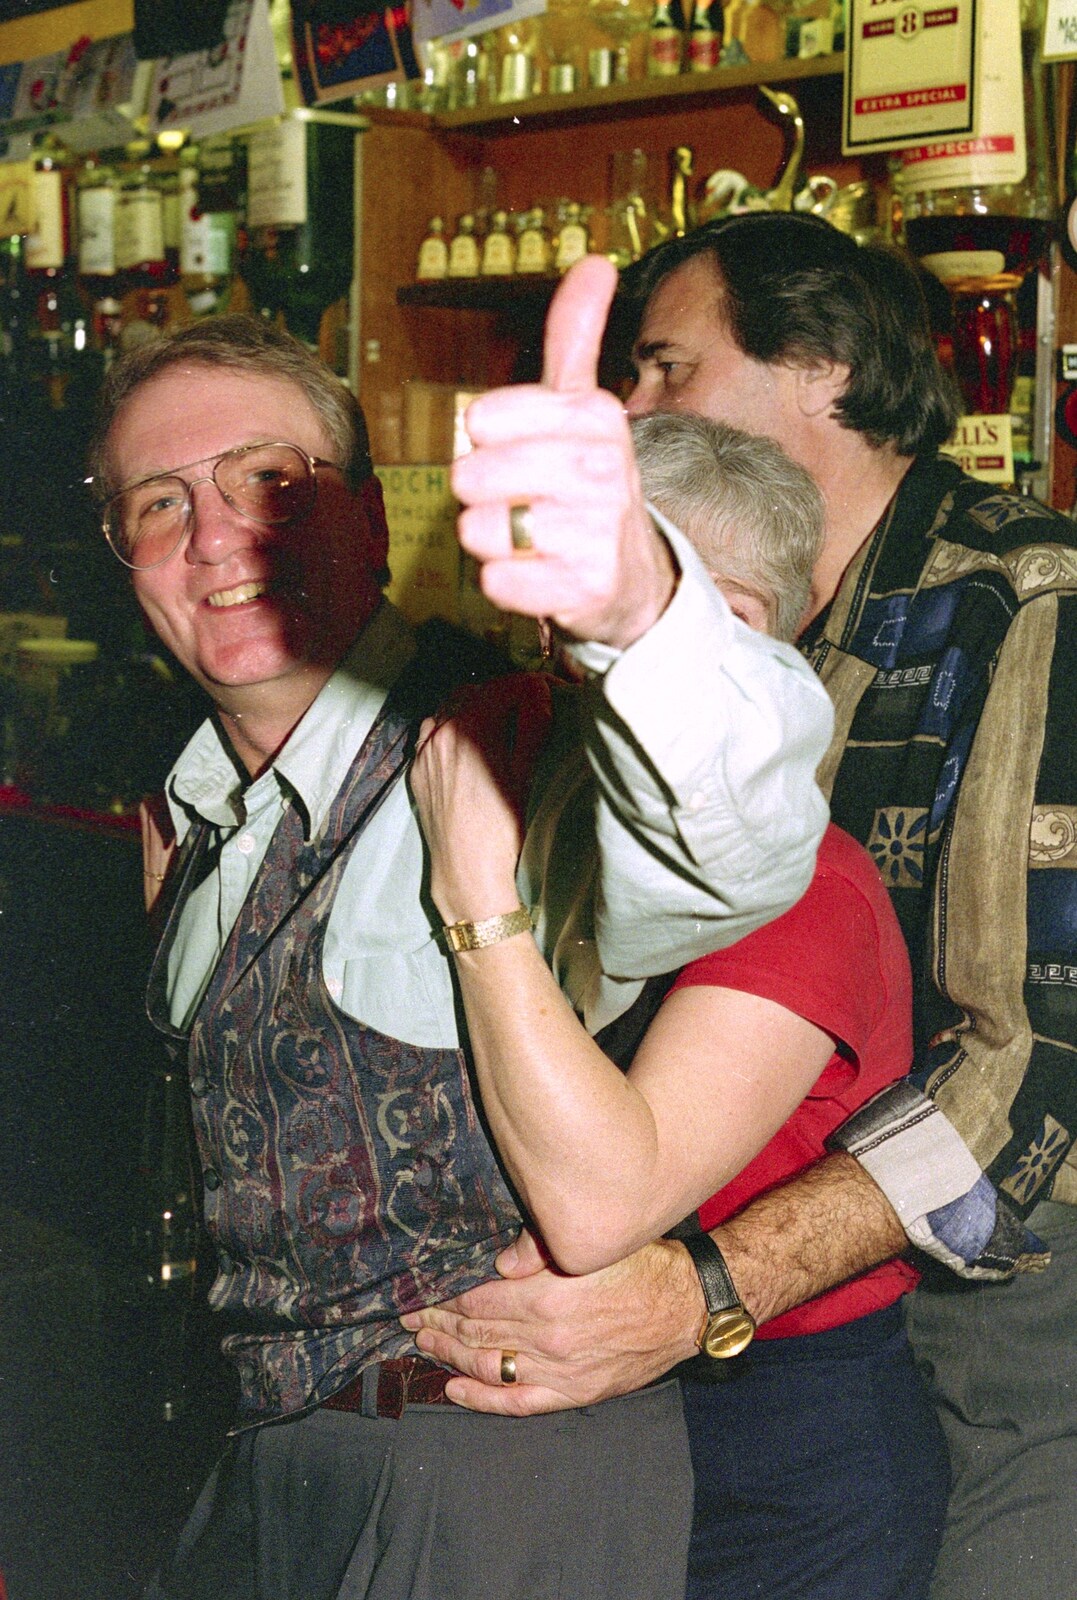 John Willy gives it the thumbs up from New Year's Eve in the Swan Inn, Brome, Suffolk - 31st December 1995